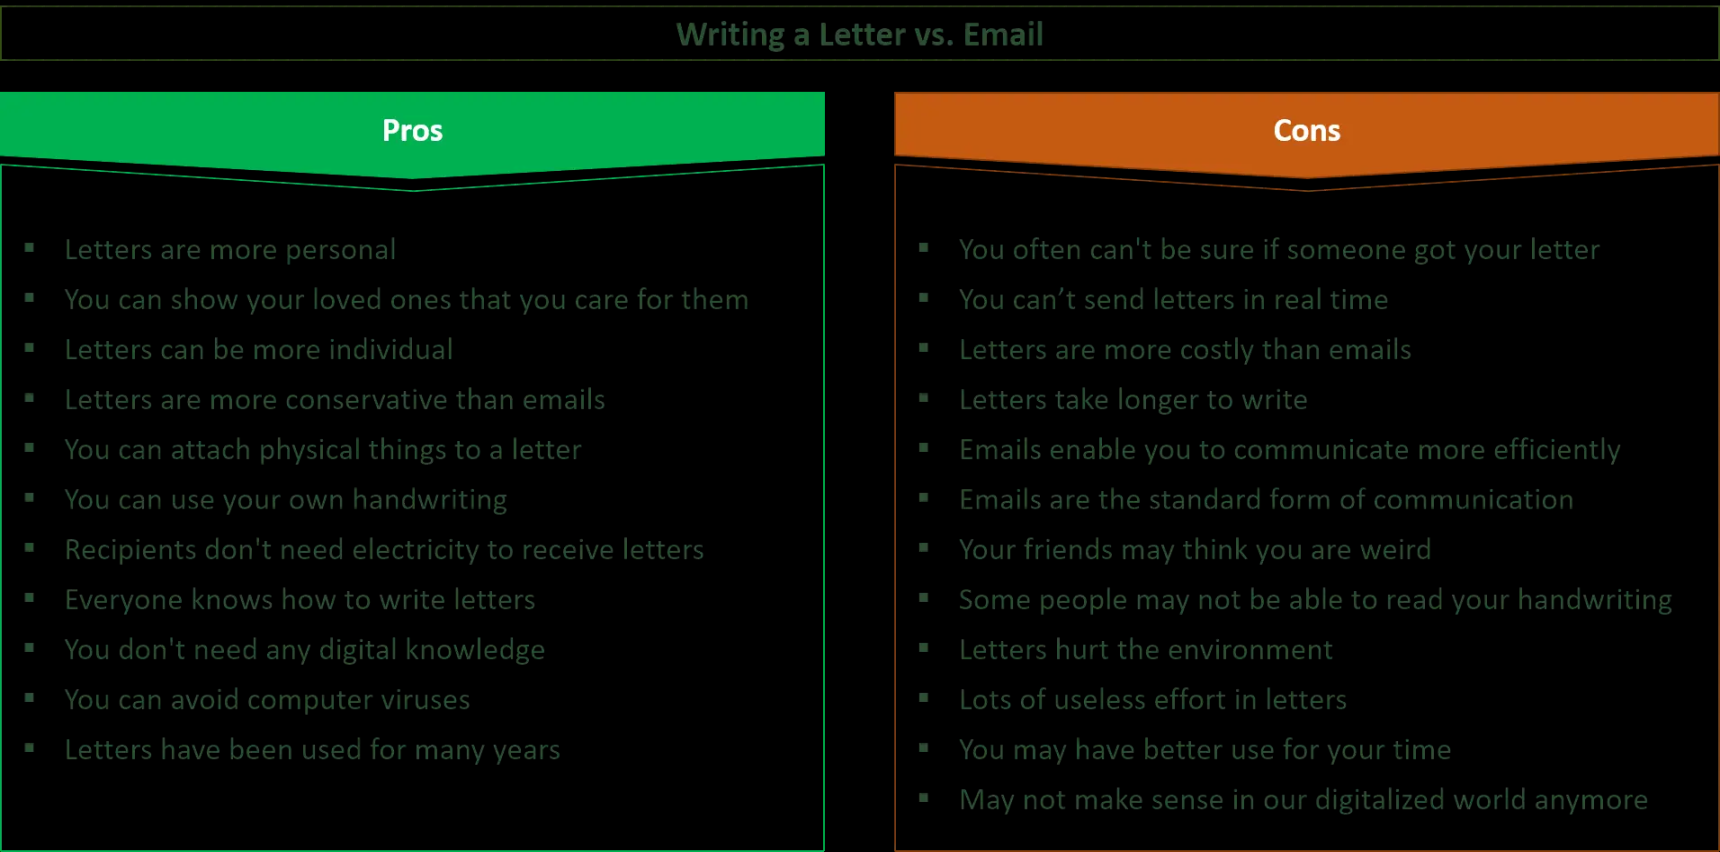 Key Pros & Cons Of Letters vs